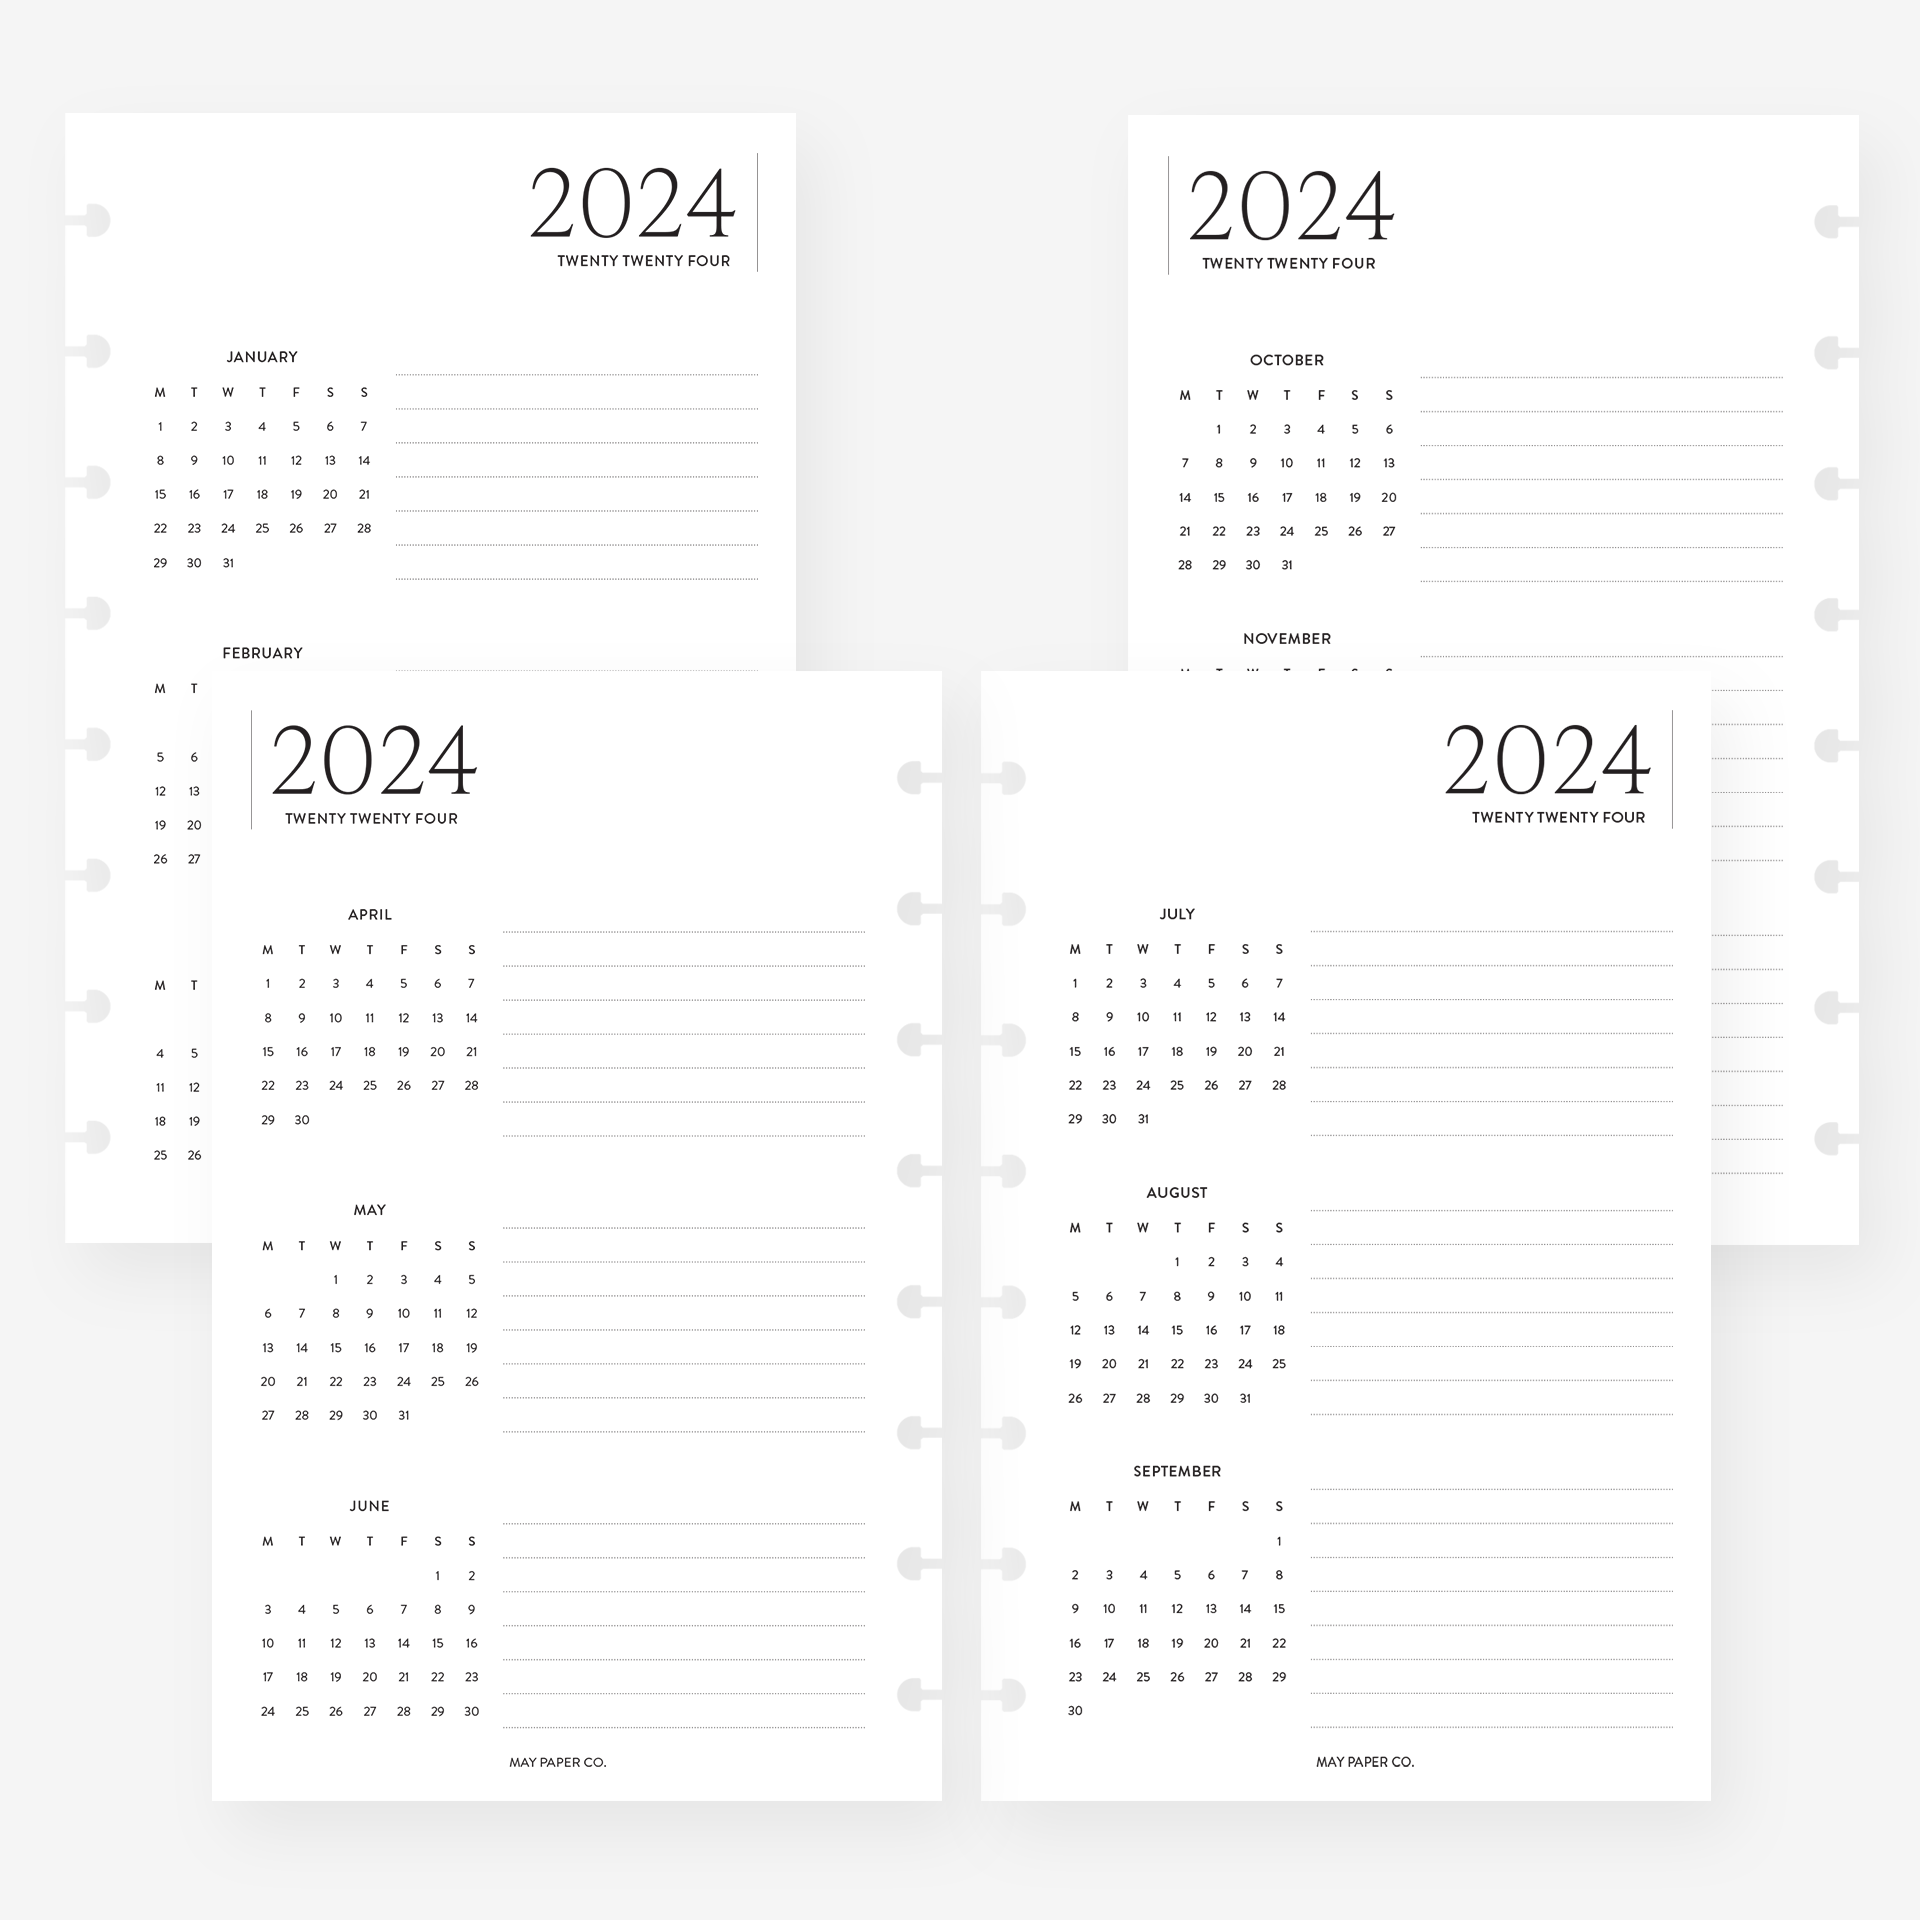 2024 Quarterly Overview (with lines) Planner Insert